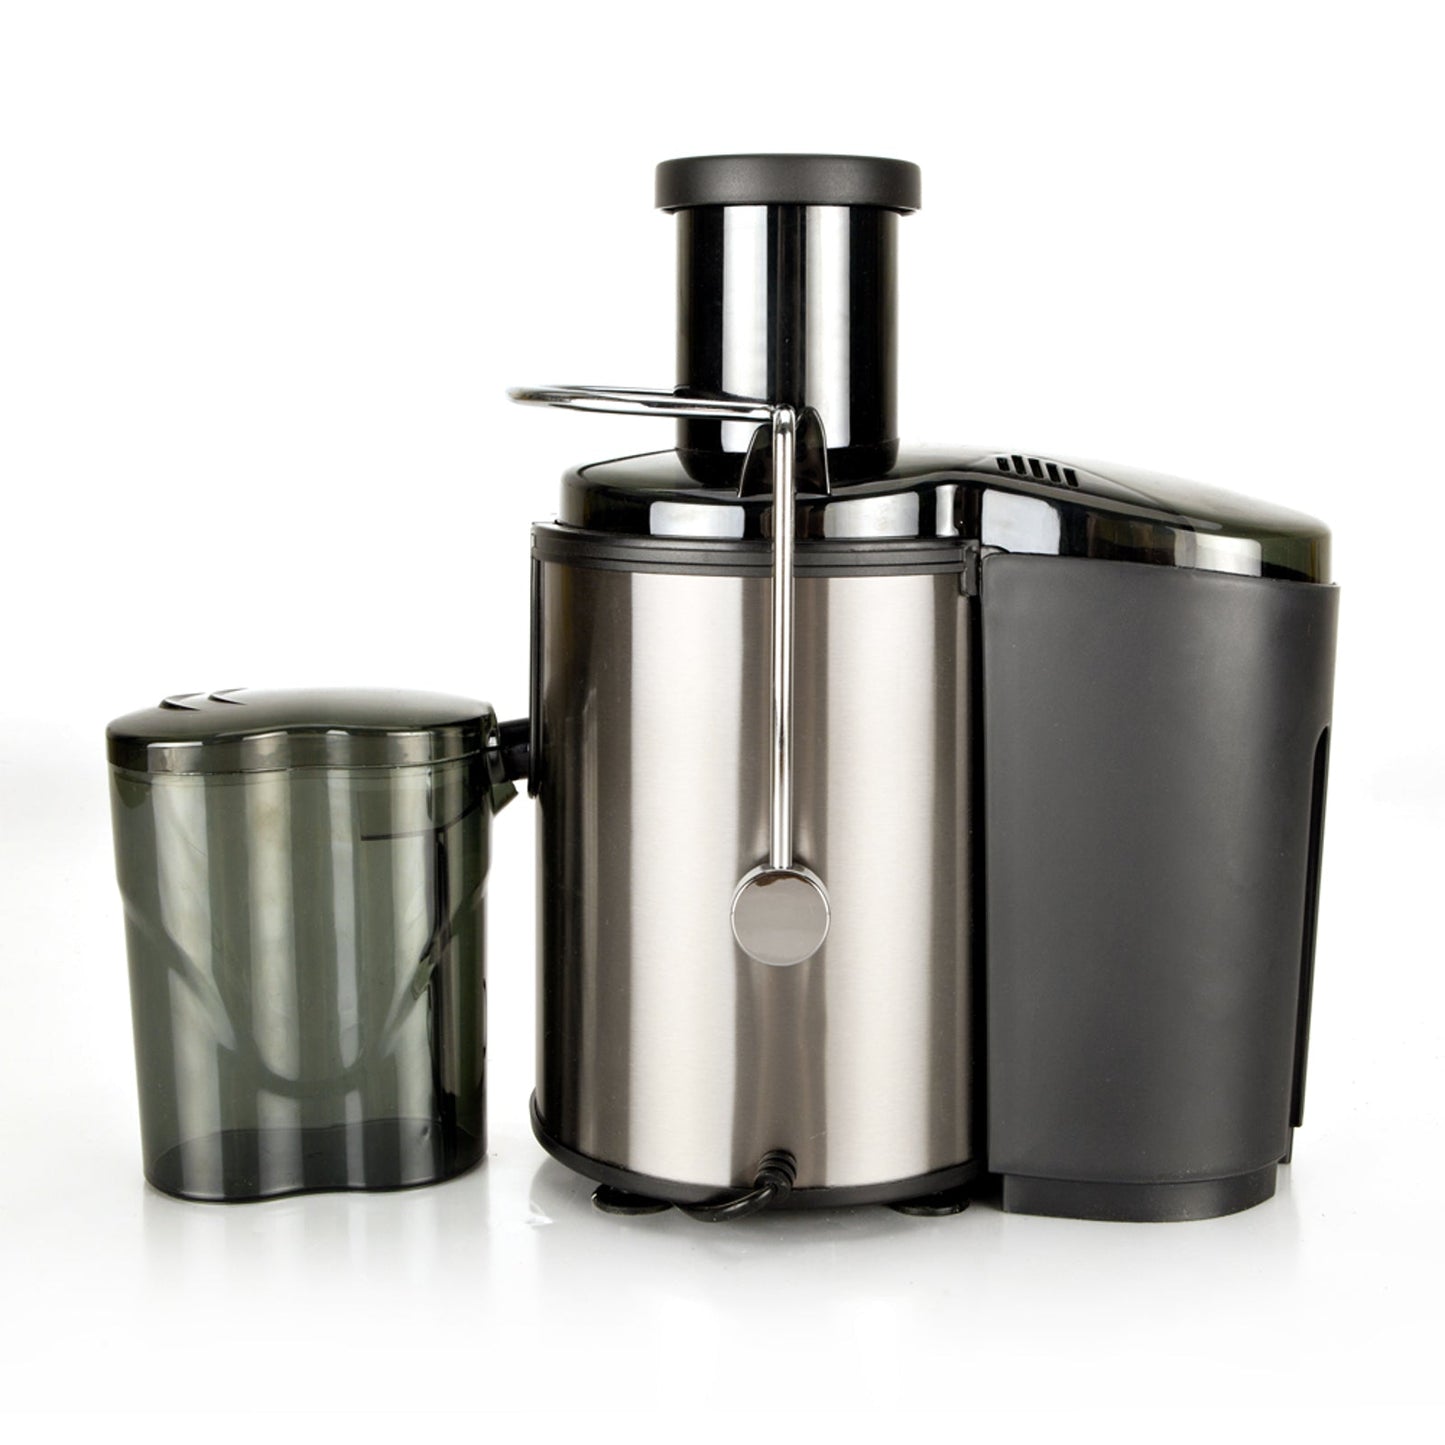 Home Use Multi-function Electric Juicer_0